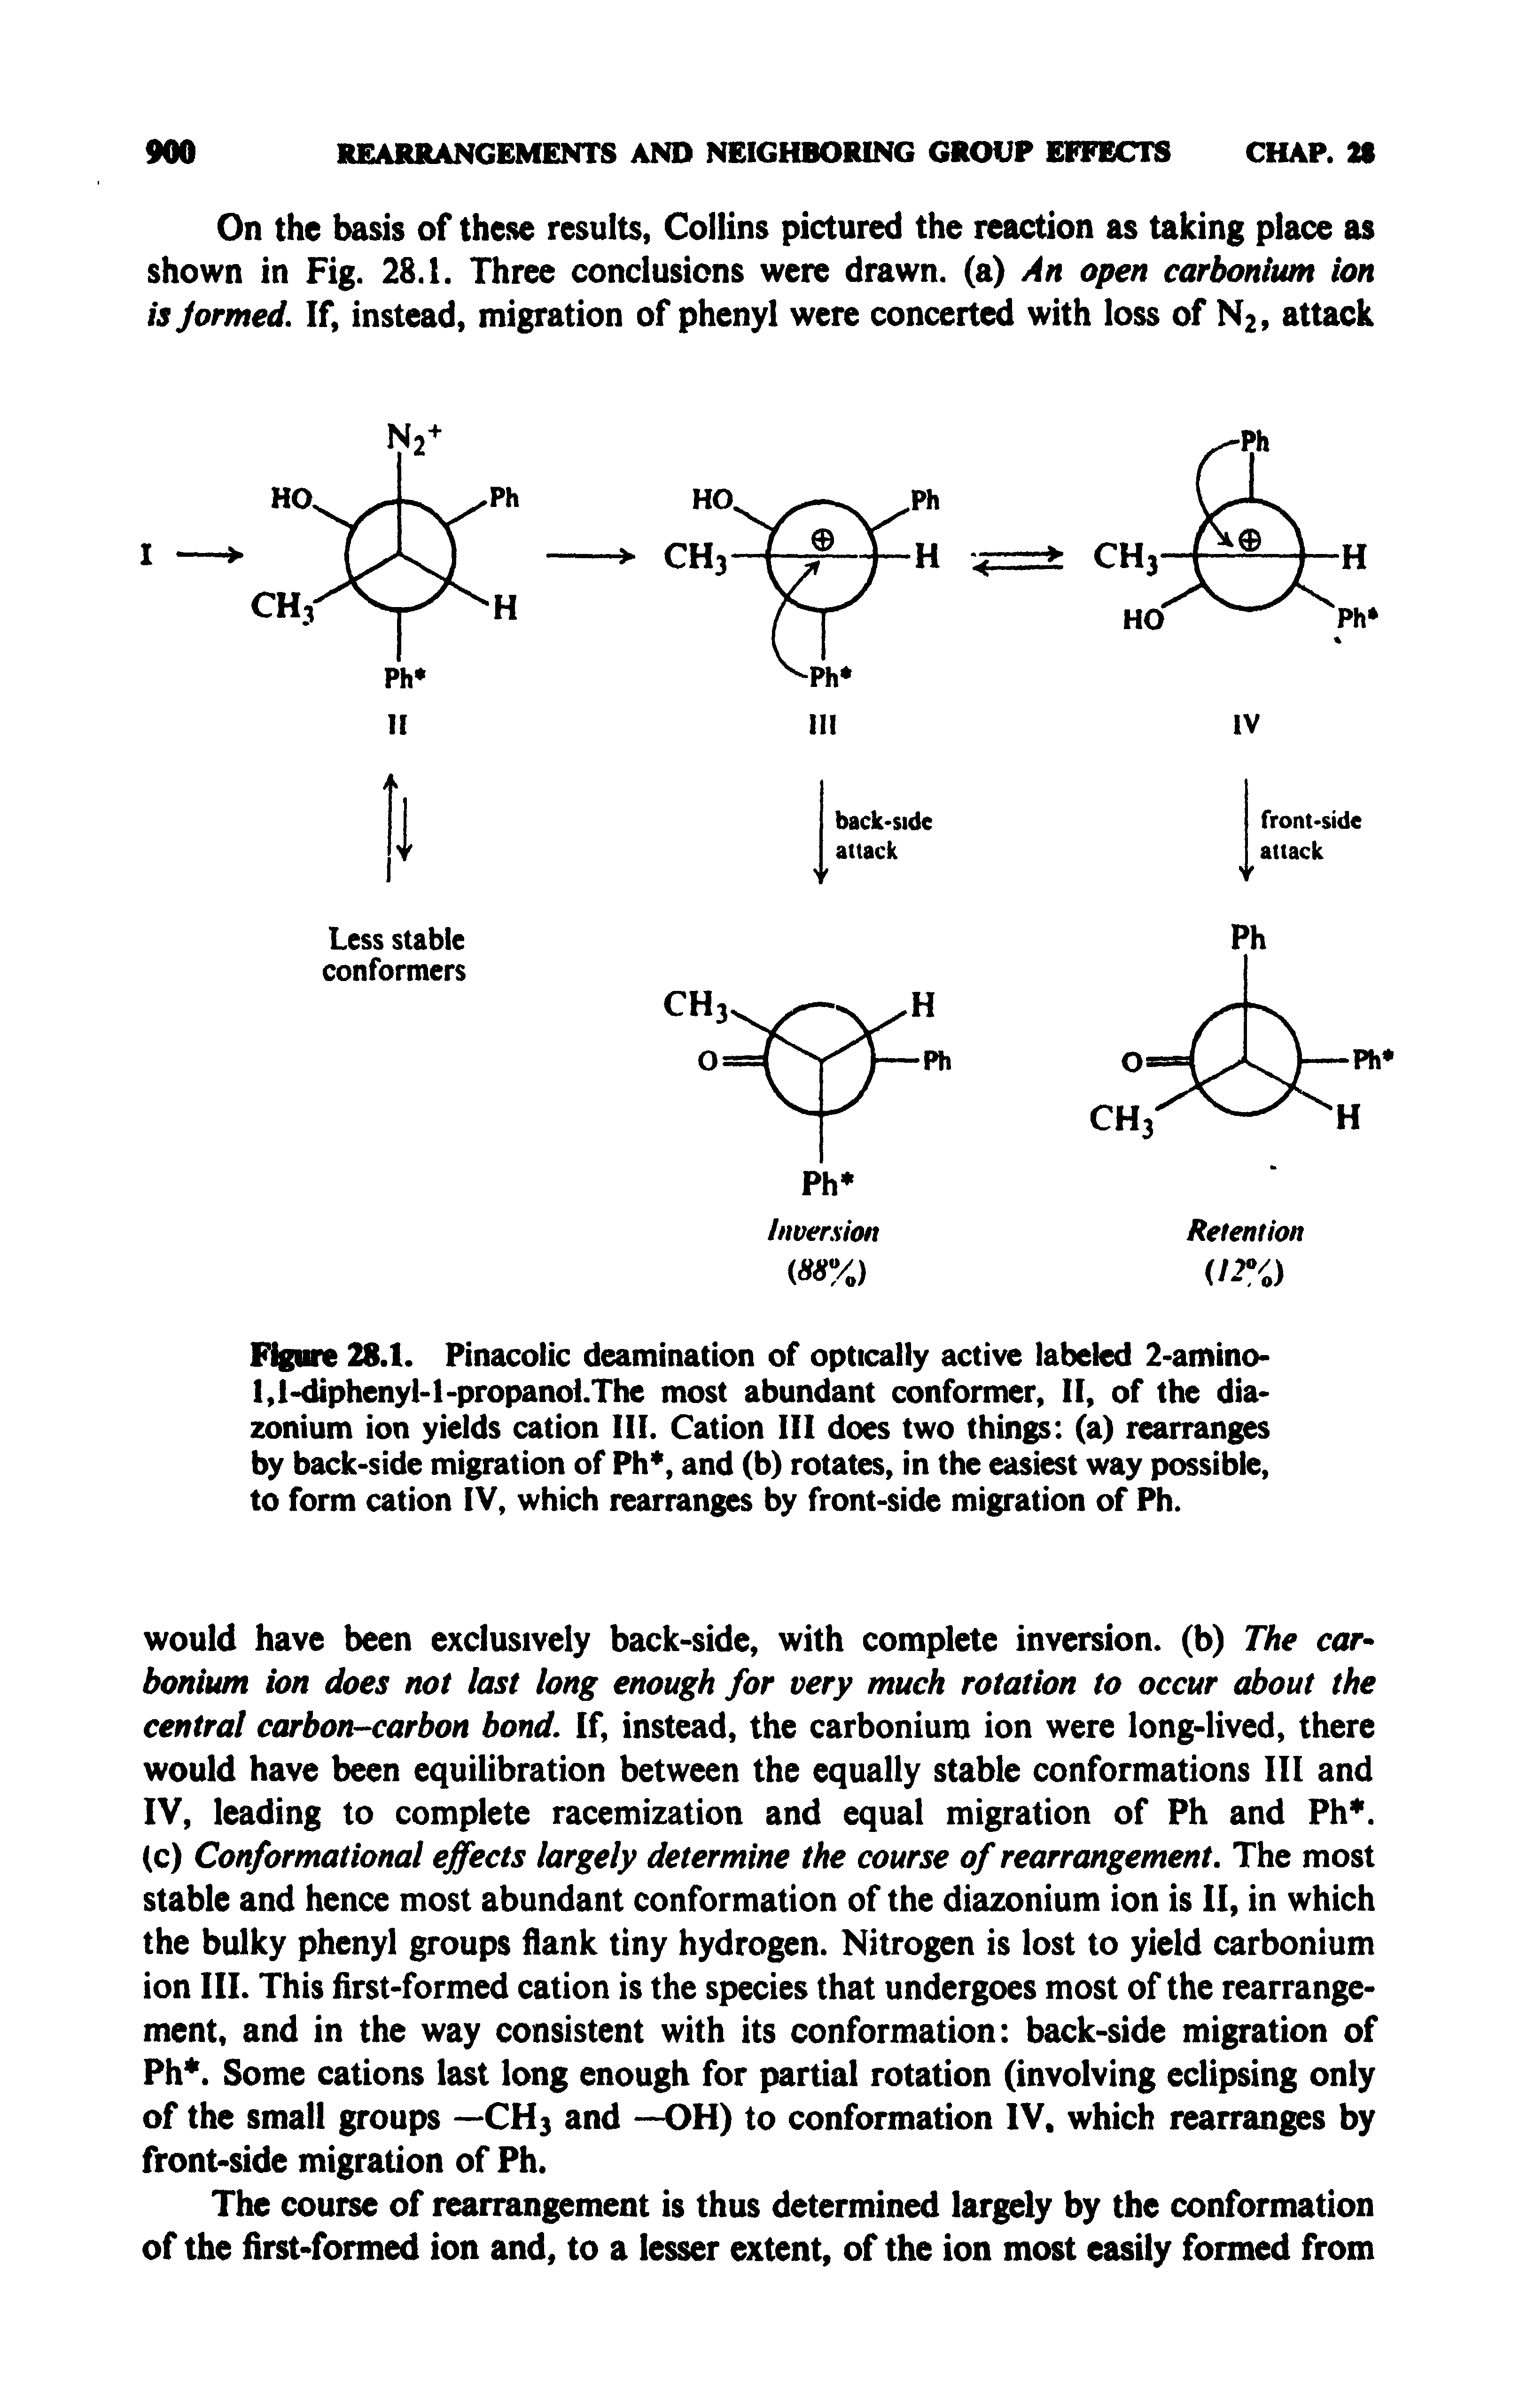 Figure 28.1. Pinacolic deamination of optically active labeled 2-amino-1,1-diphenyl-1-propanol.The most abundant conformer, II, of the dia-zonium ion yields cation 111. Cation III does two things (a) rearranges by back-side migration of Ph, and (b) rotates, in the easiest way possible, to form cation IV, which rearranges by front-side migration of Ph.